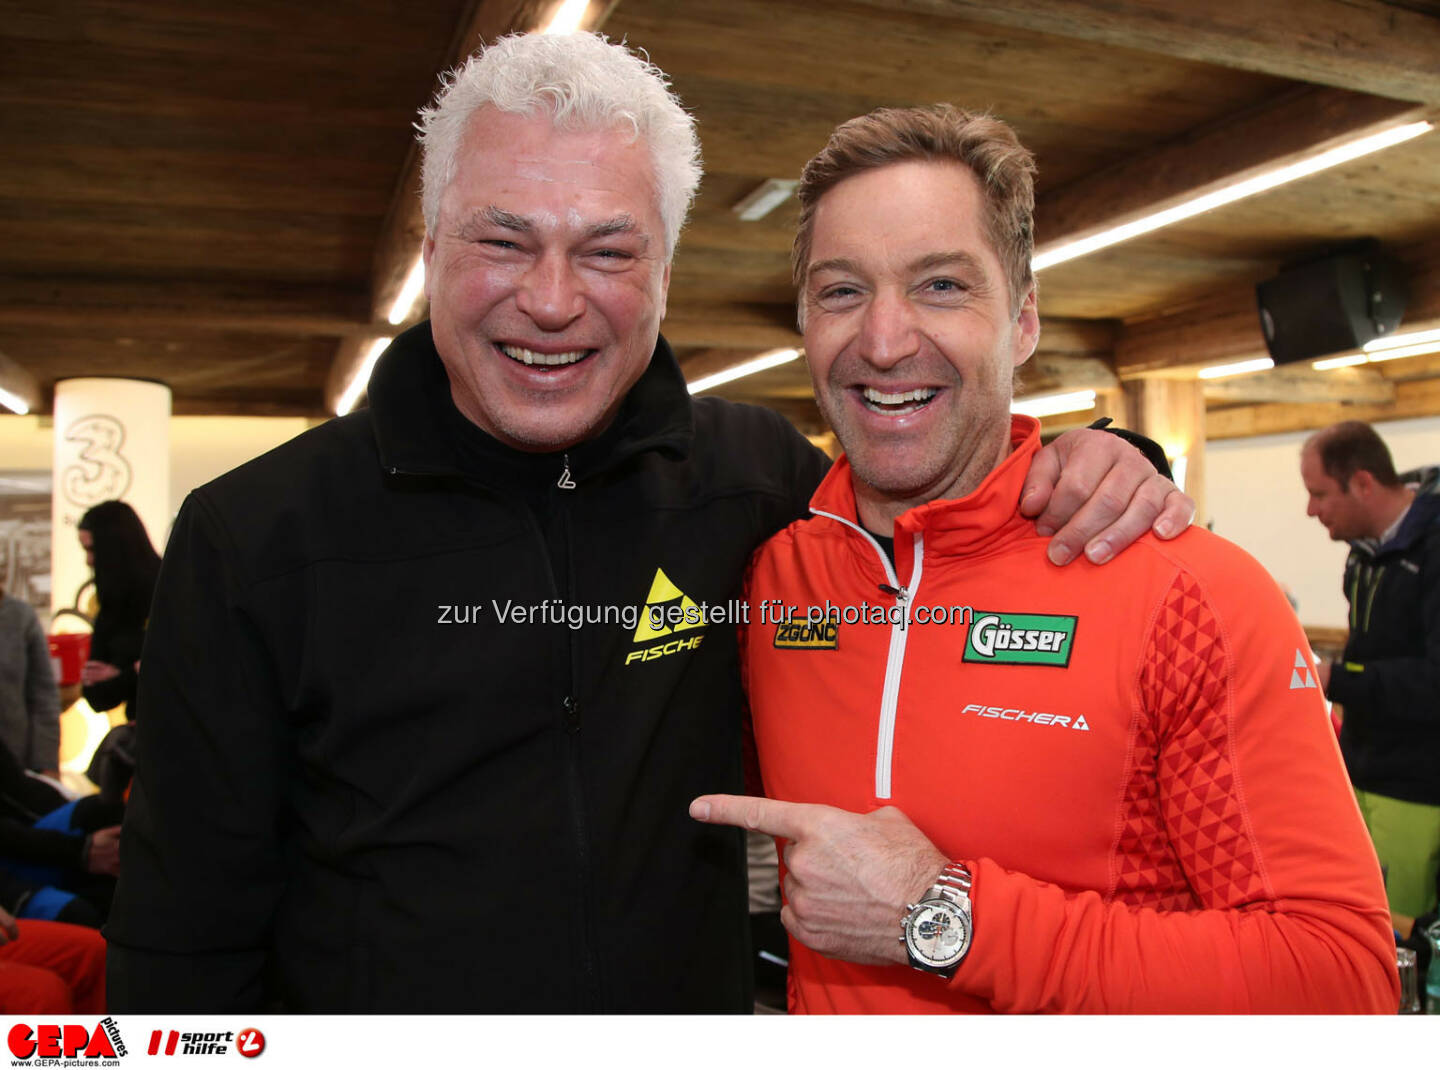 Ski for Gold Charity Race. Image shows Toni Polster and Hans Knauss. Photo: GEPA pictures/ Harald Steiner